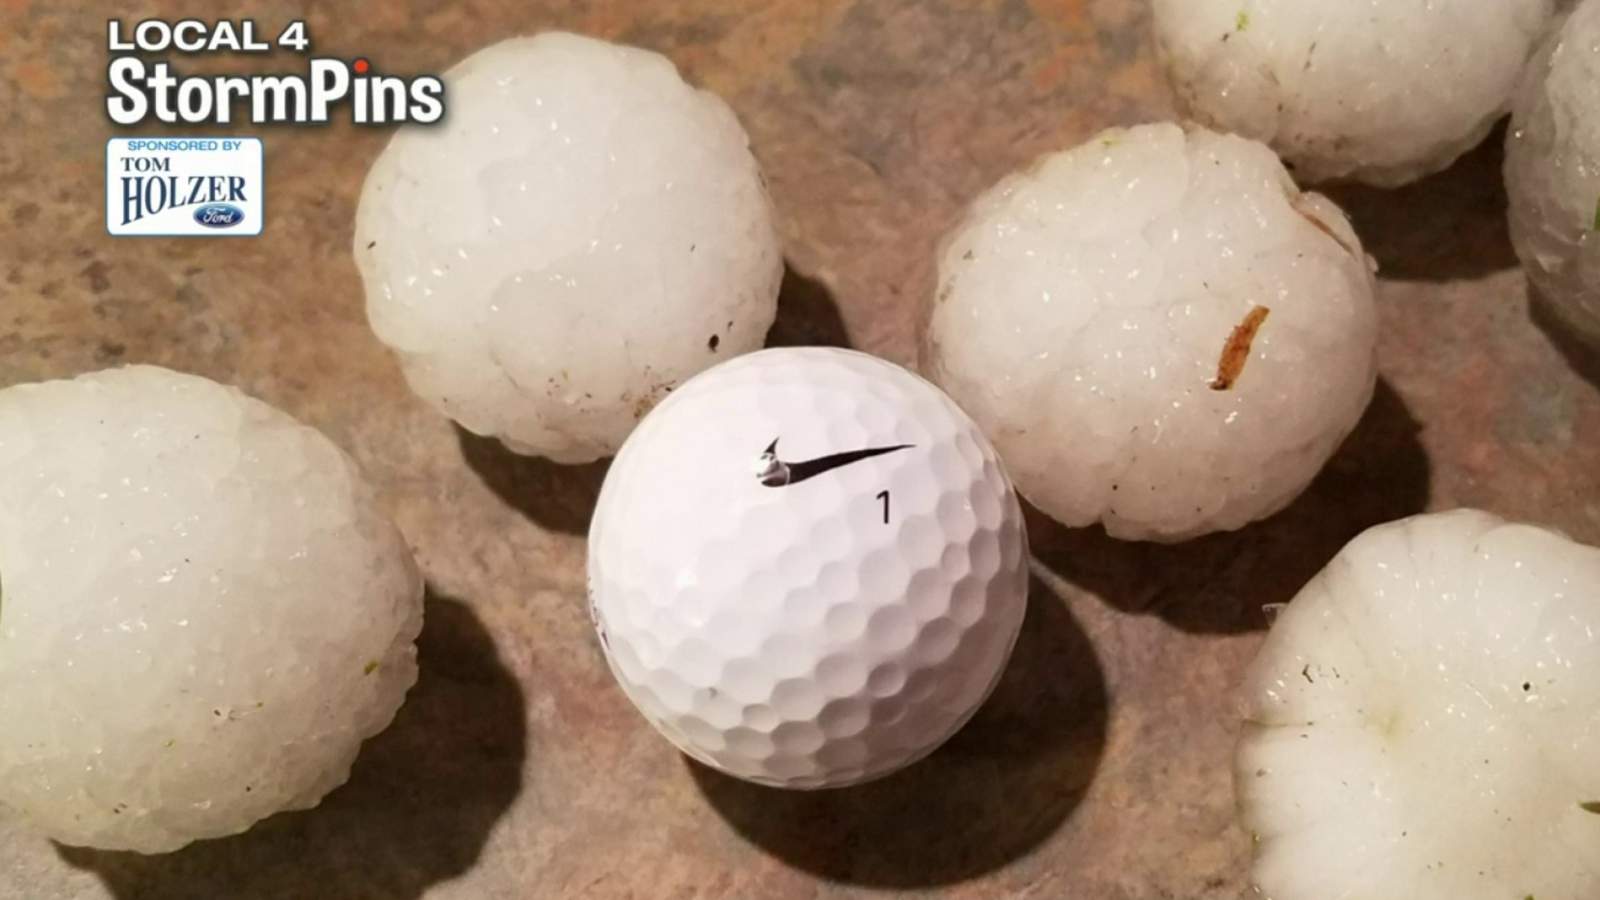 SE Michigan sees golf ball-sized hail during April storms